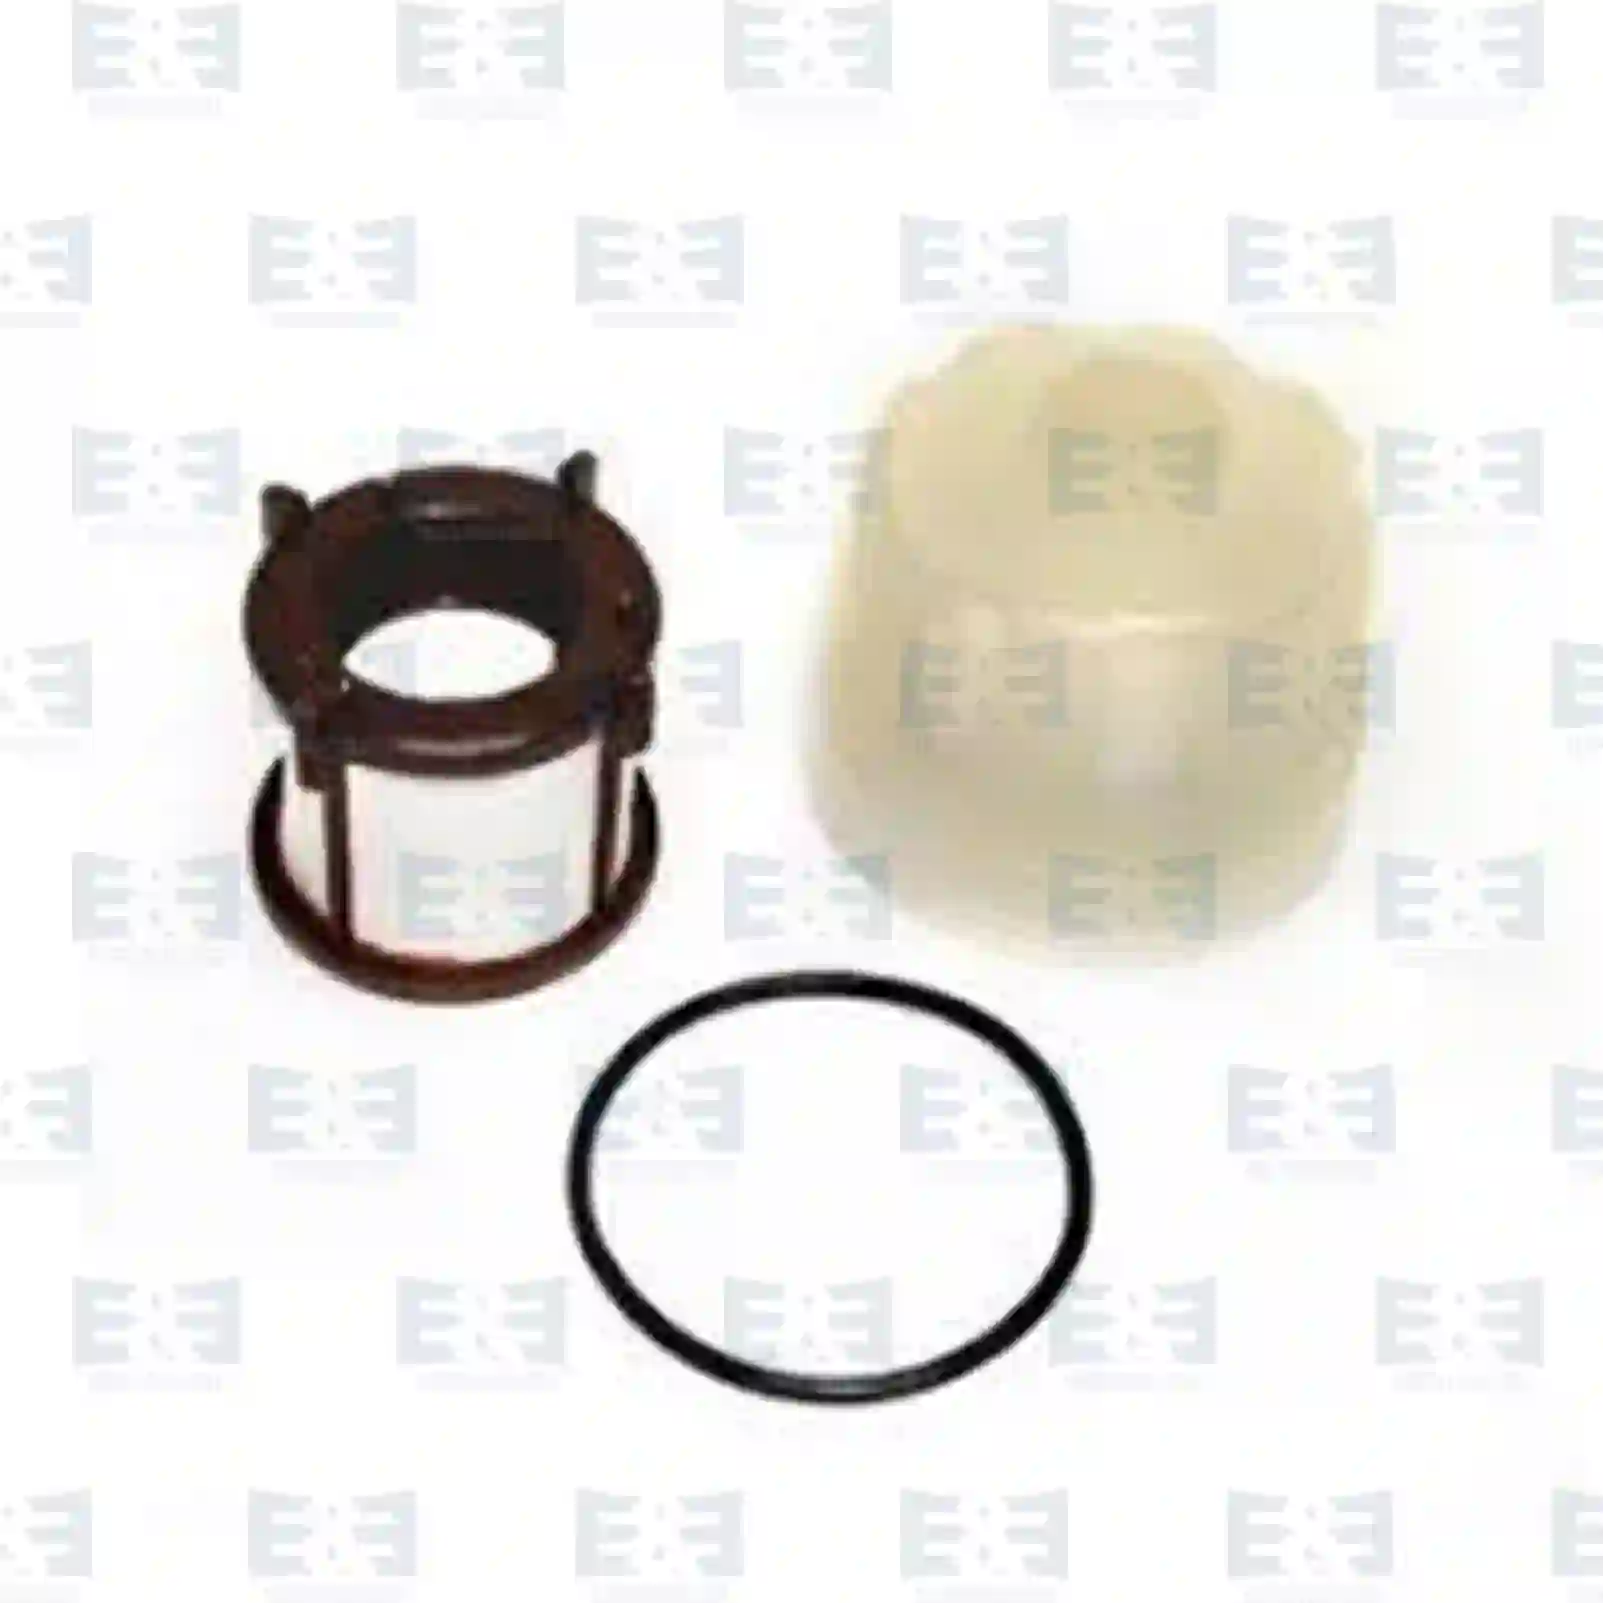 Feed Pump Filter repair kit, without filter housing, EE No 2E2287843 ,  oem no:1438836, 1527478, 1529699, 1534424, 1683353, 571571308, 51125030043, 0000900751, 0000901351, 0000902051, 5001852912, 7424993611, ZG10413-0008 E&E Truck Spare Parts | Truck Spare Parts, Auotomotive Spare Parts